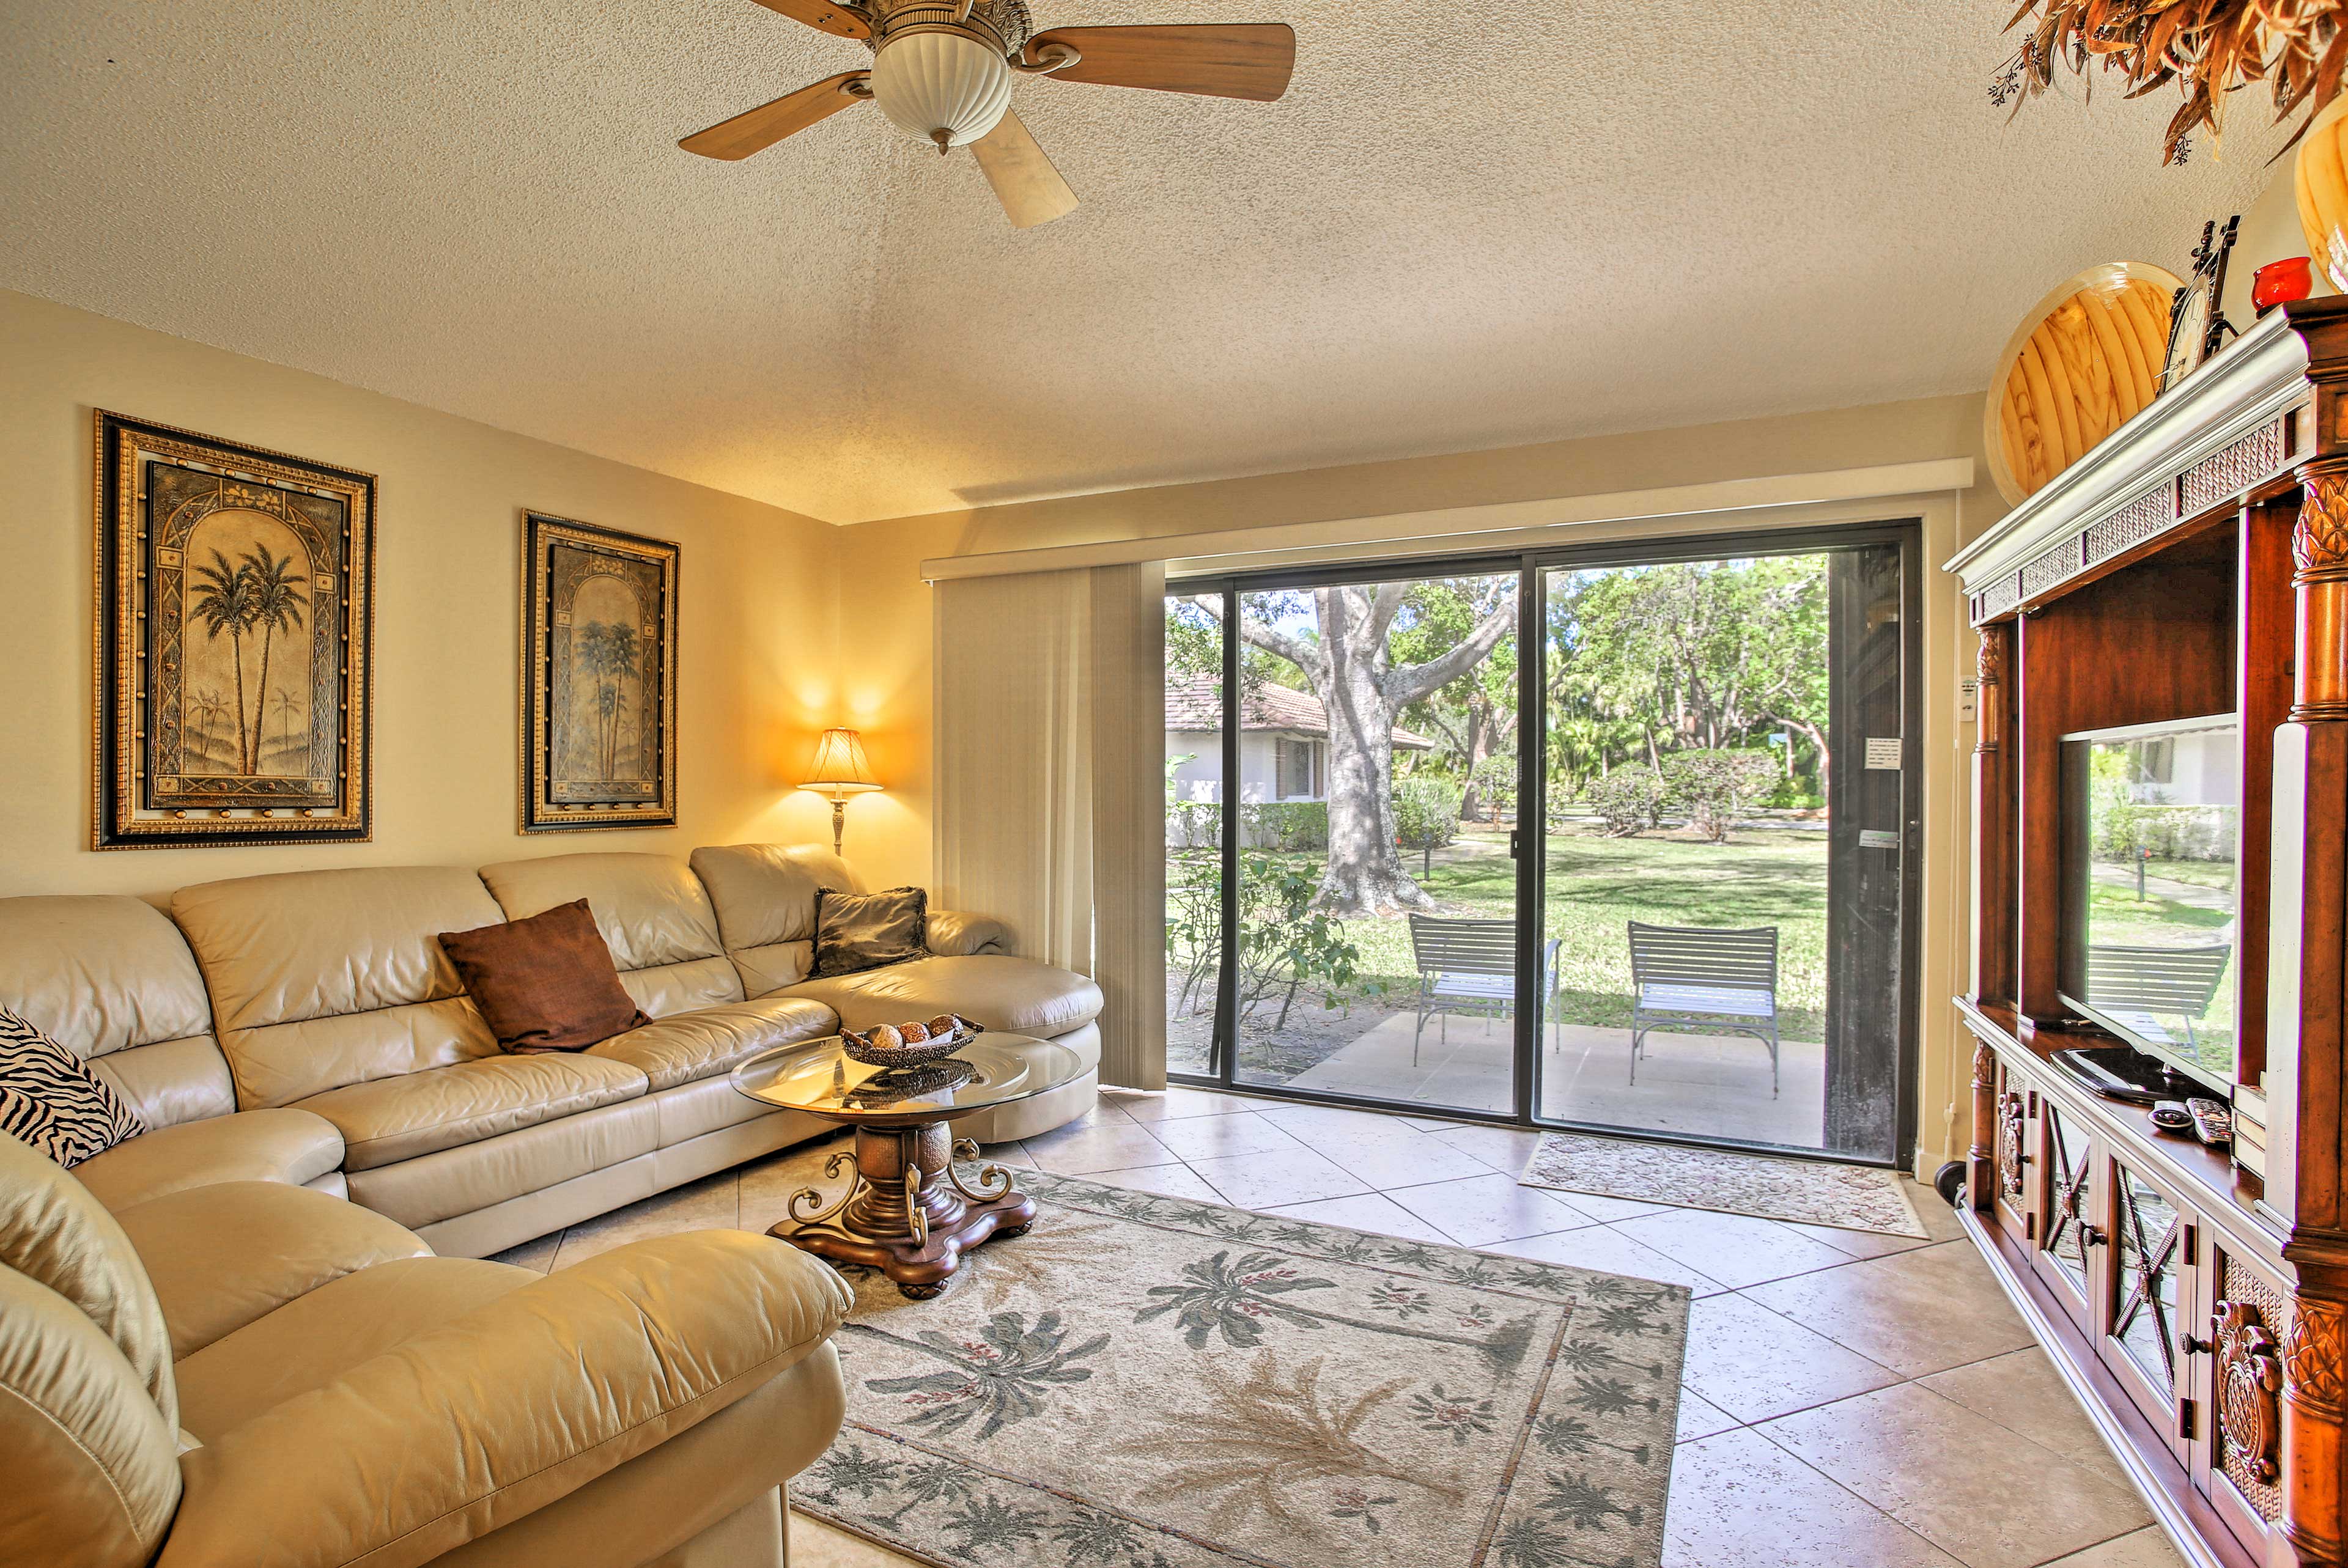 Discover Palm Beach Gardens from this vacation rental home!